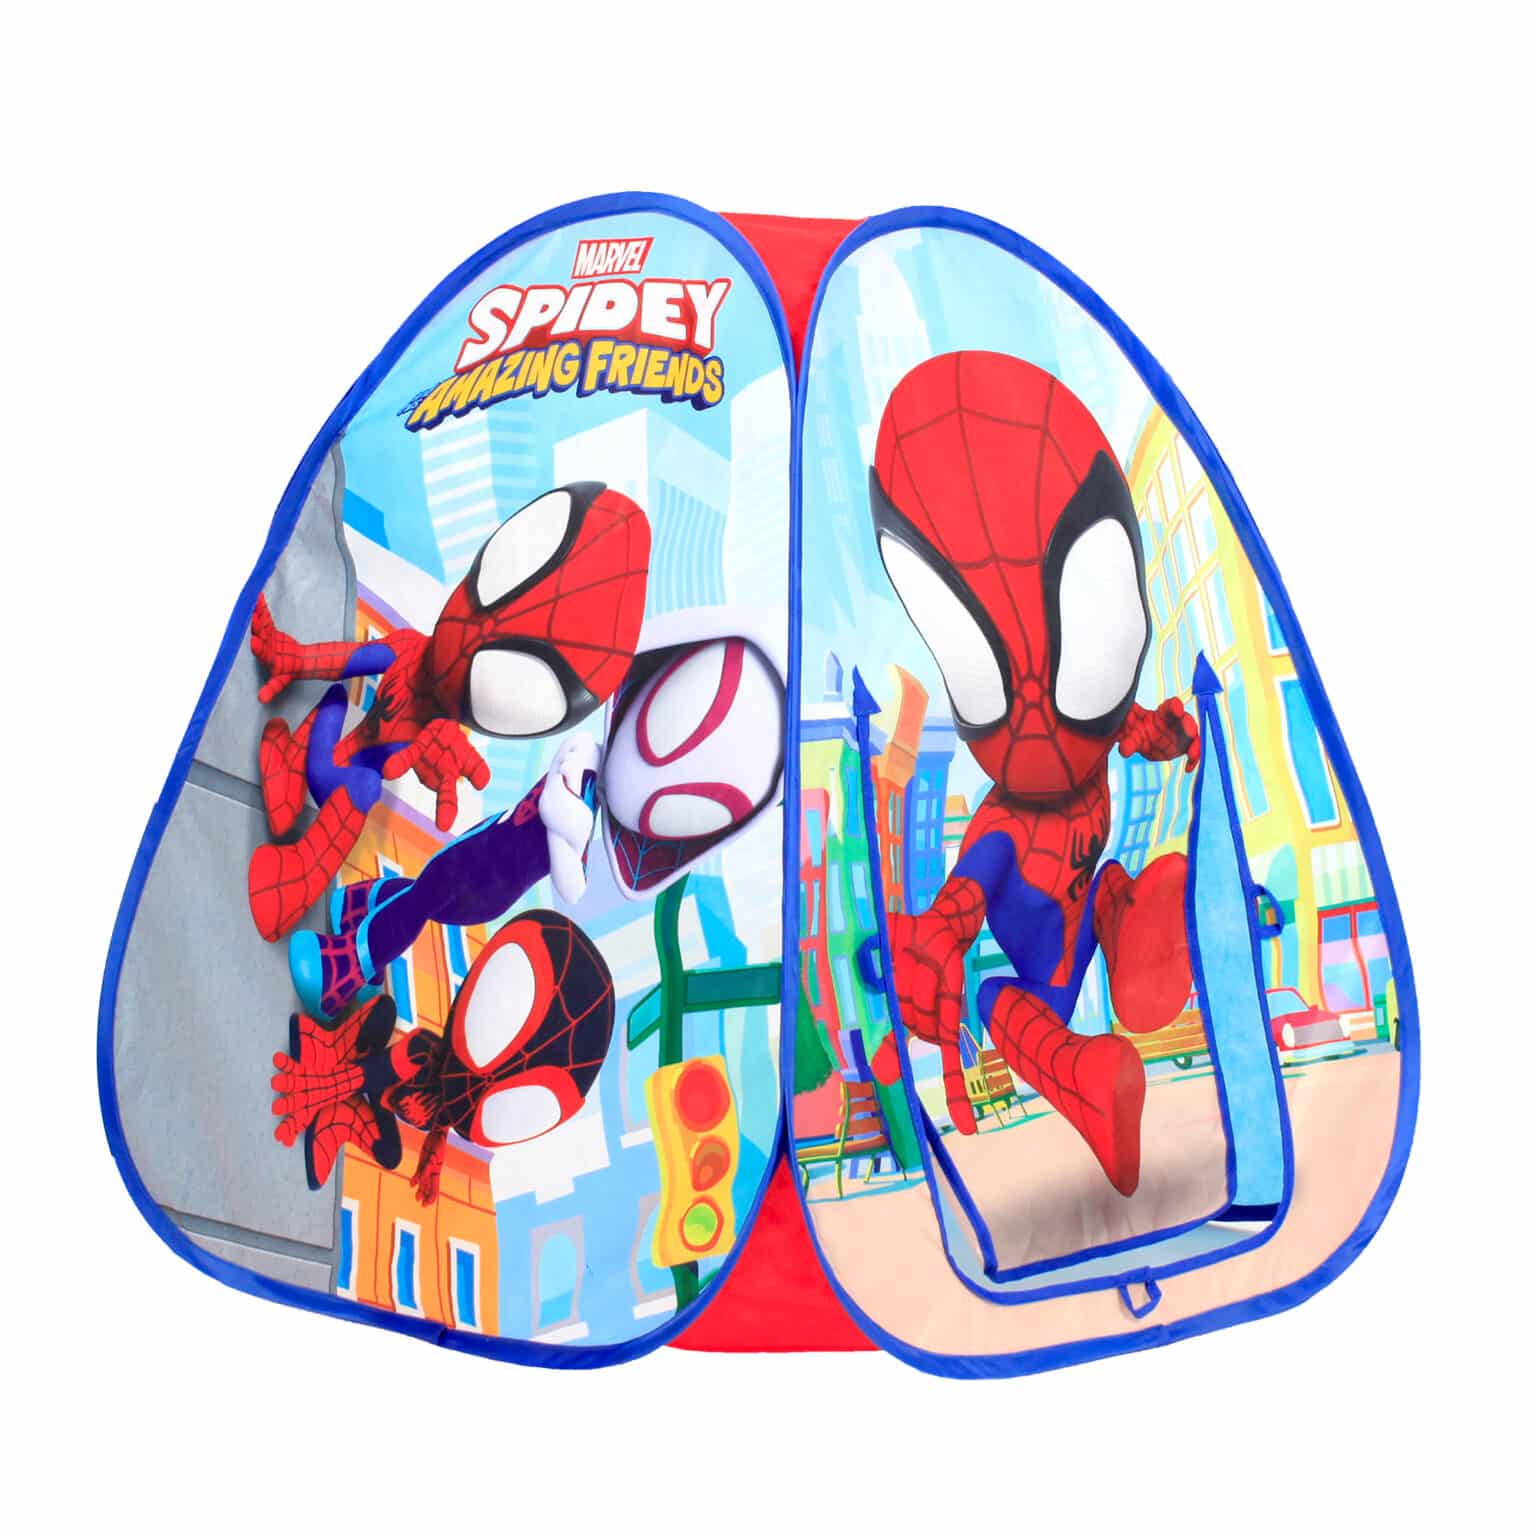 Spidey & His Amazing Friends Classic Hideaway Tent